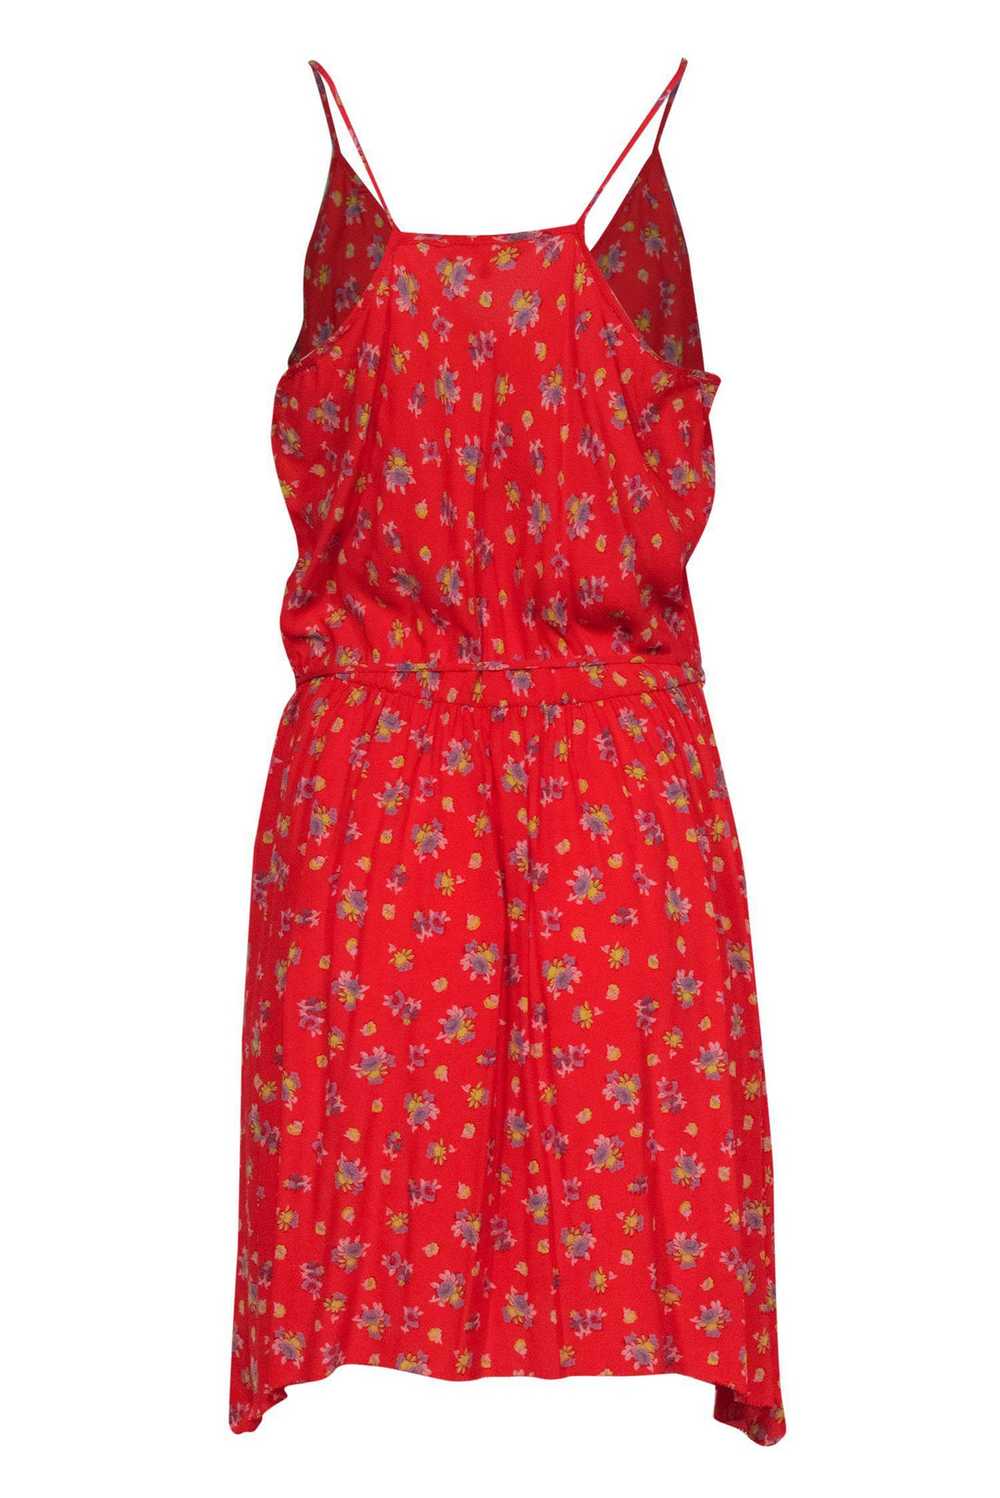 Rebecca Taylor - Red Floral Fitted Sundress Sz 10 - image 3